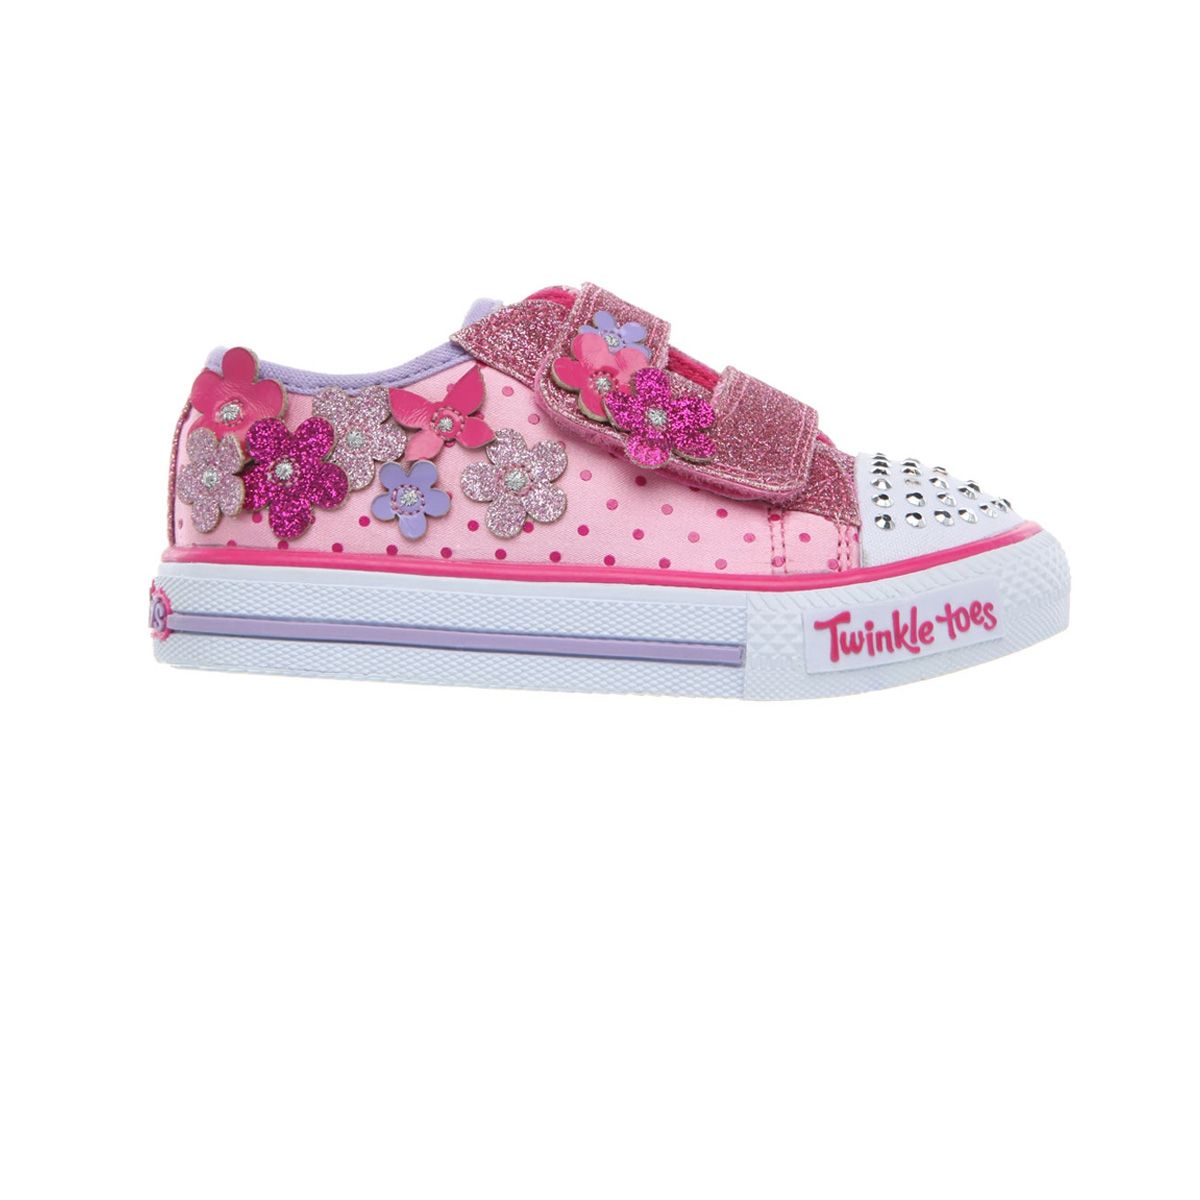 Chaussures pretty blossom bebe pink flowers h15 Skechers